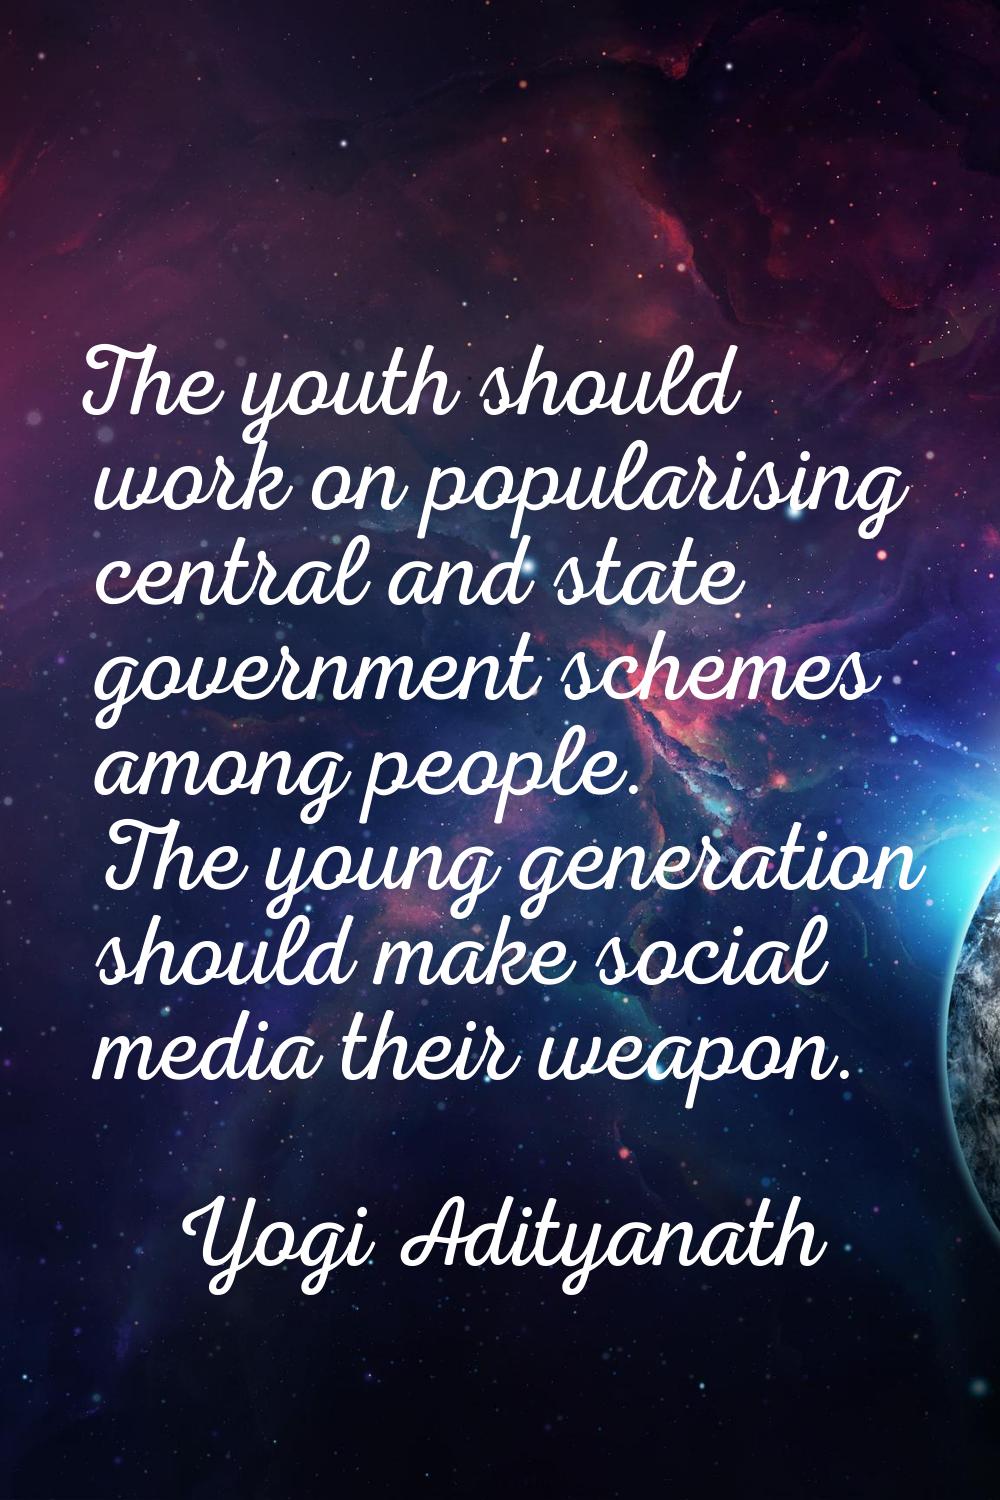 The youth should work on popularising central and state government schemes among people. The young 